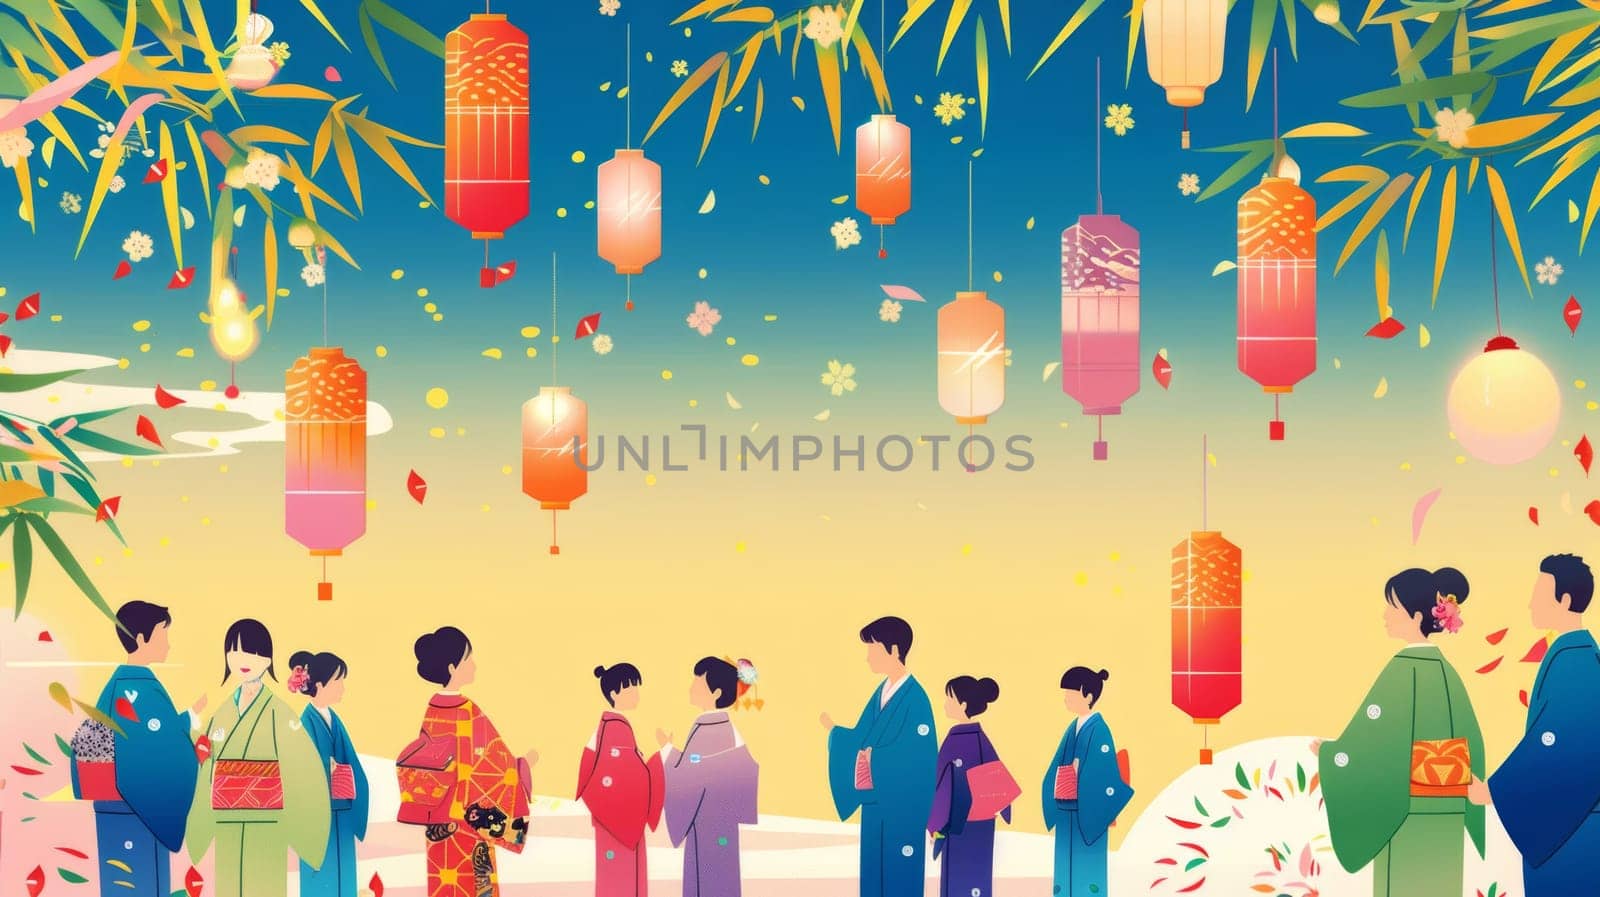 A vivid Tanabata night scene captured with colorful paper lanterns hanging amidst bamboo leaves, sparkling against a starry background in a festive display. by sfinks